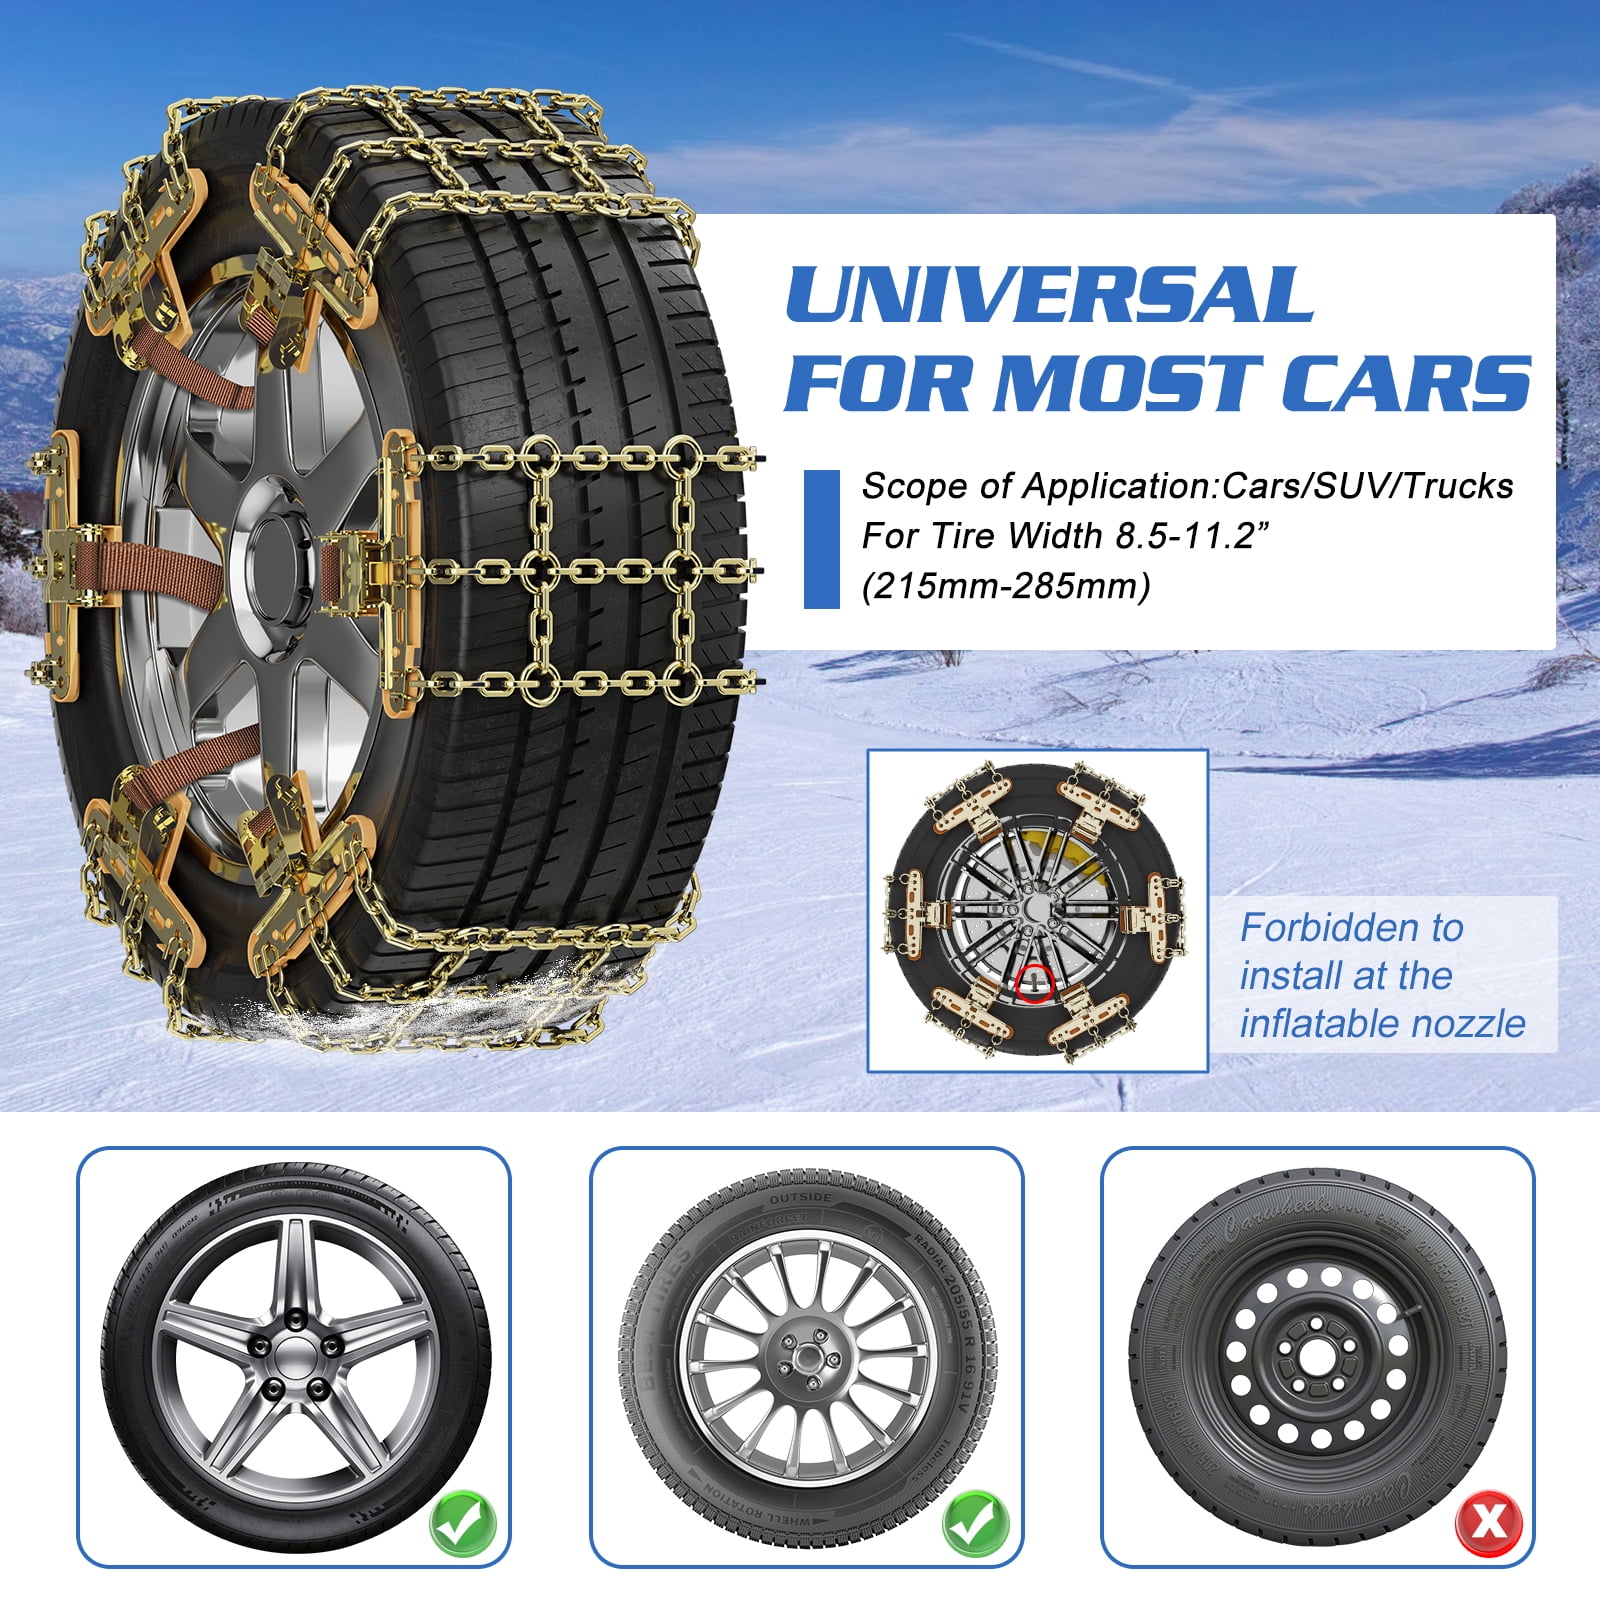  Snow Tire Chains, Universal Car Emergency Anti Slip Snow Chains,  6 Pack Winter Security Tire Chains Tire Width 195-225mm(7.6-8.9 inch) for  Most Cars/SUV/Trucks(Medium) : Automotive